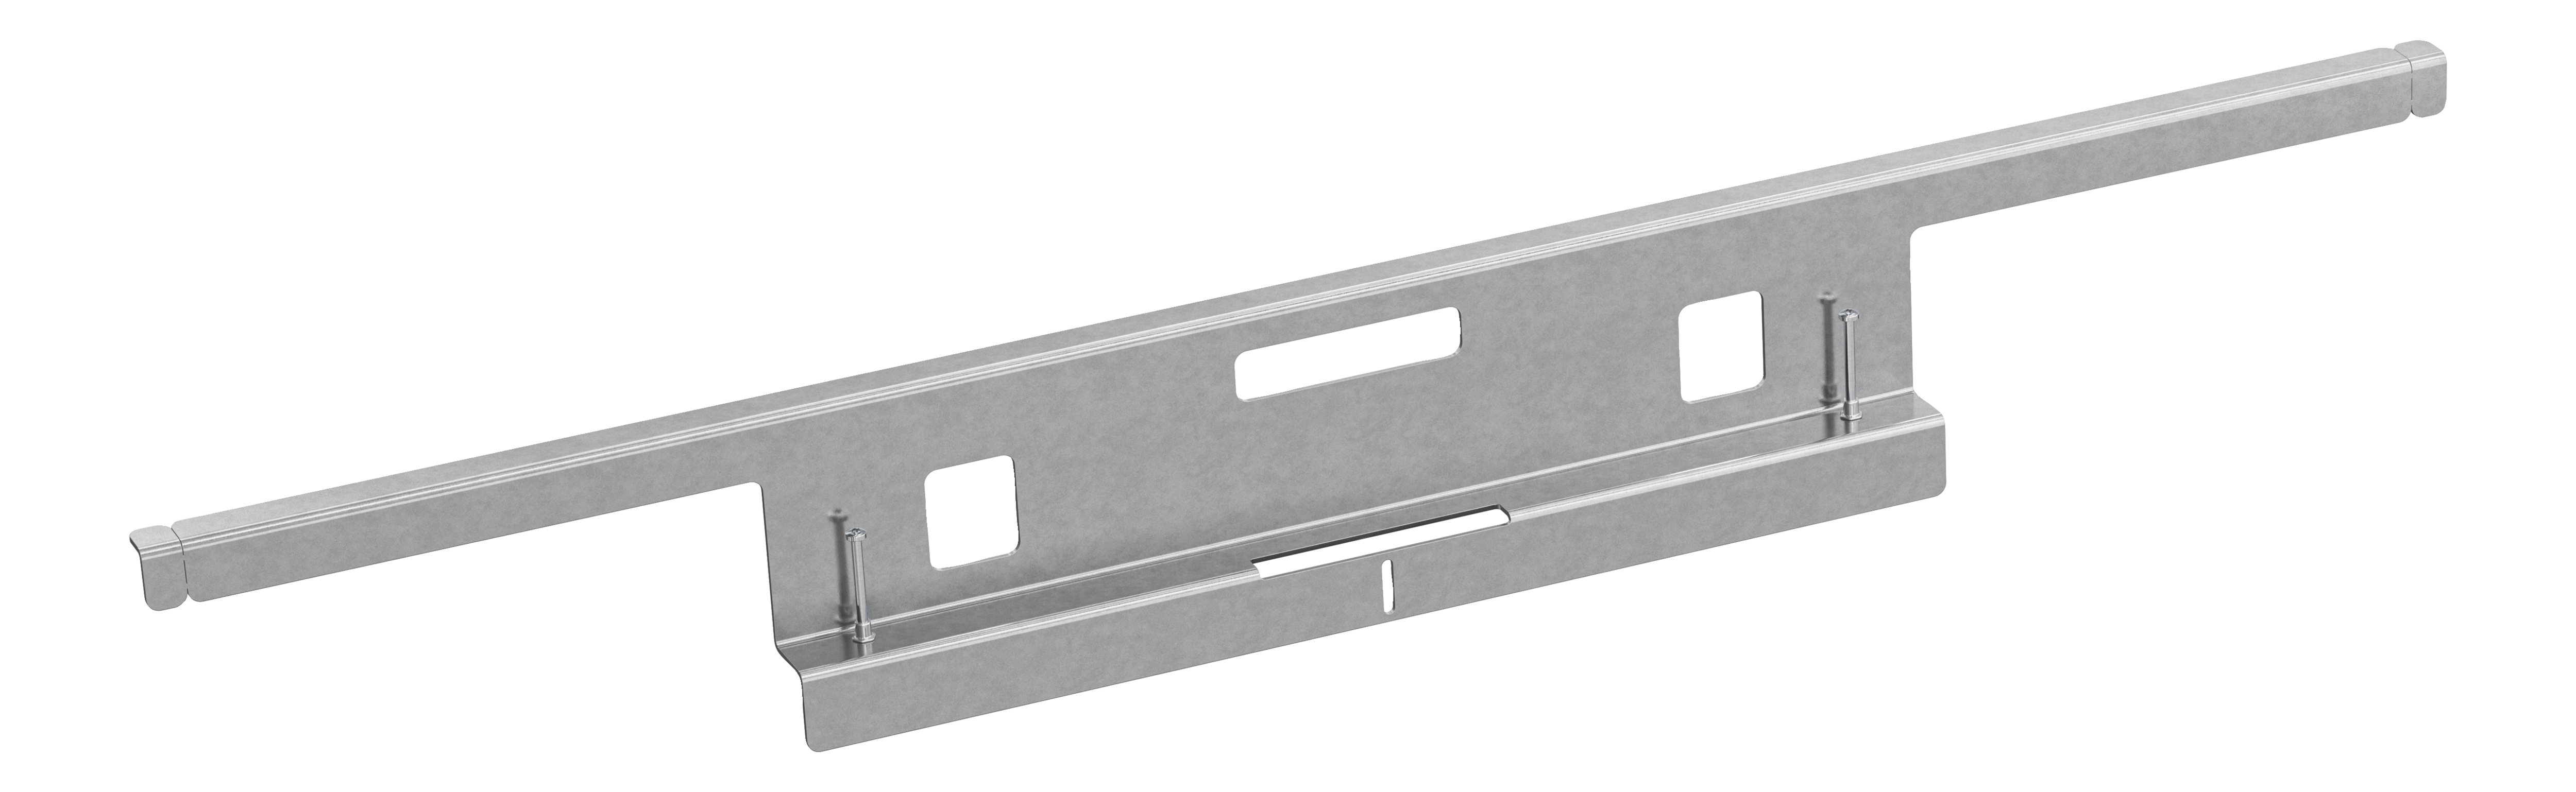 DWL 80Angle trim for DAD 4x40 downdraft extractor